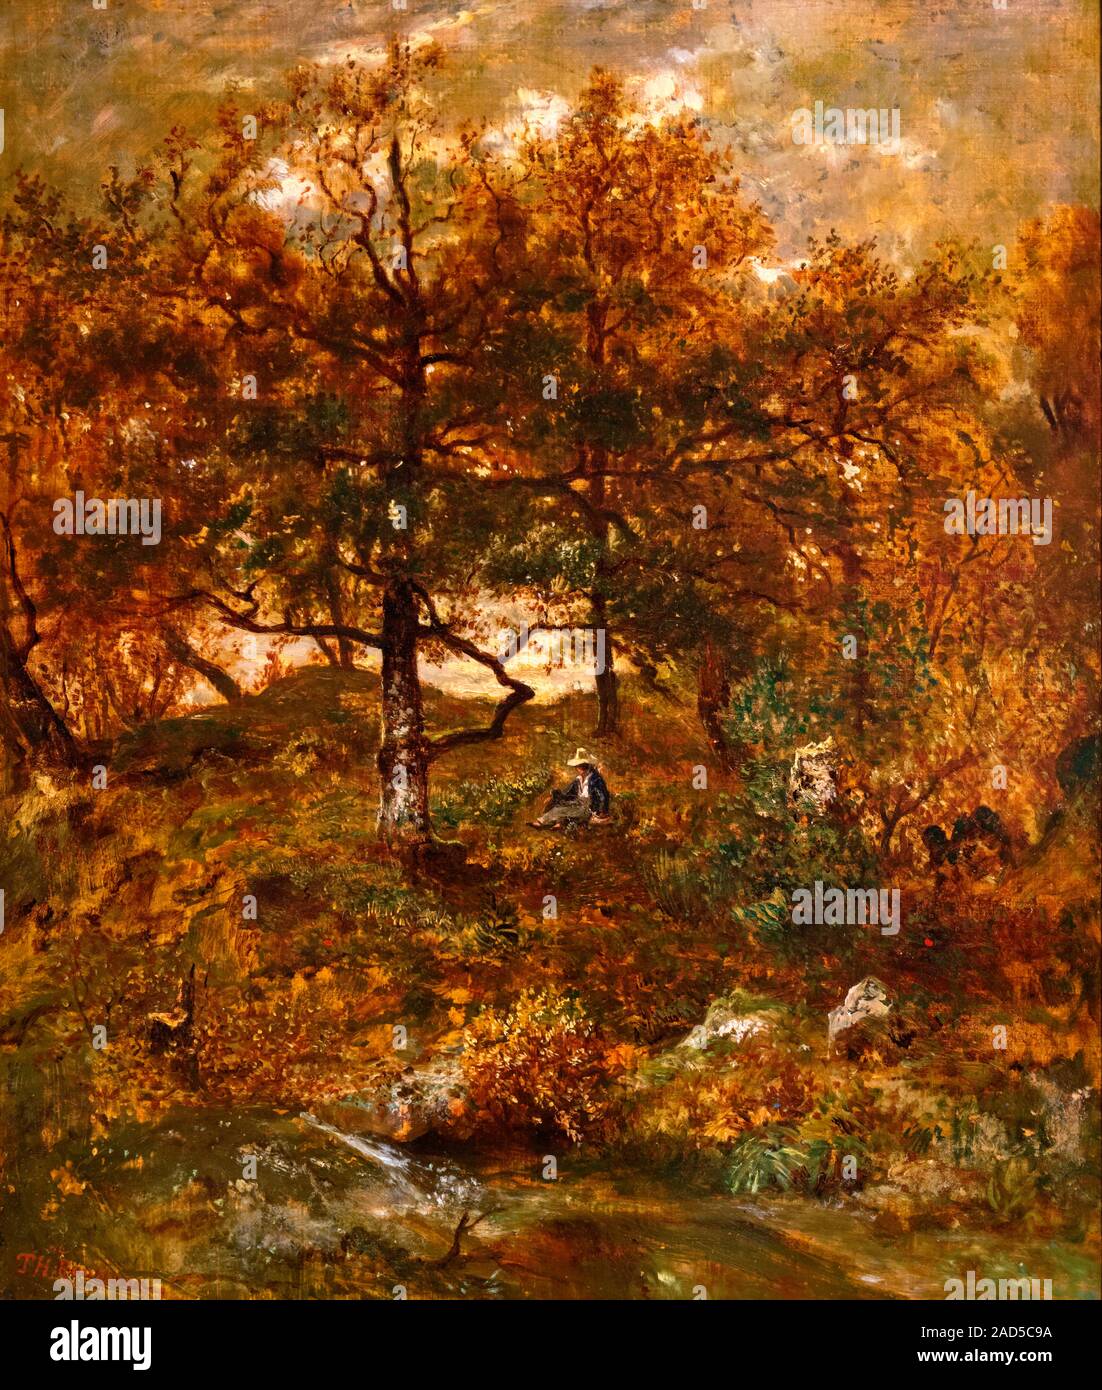 Autumn at St. Jean de Paris, Forest of Fontainebleau by Theodore Rousseau (1812-1867), oil on canvas, 1846 Stock Photo